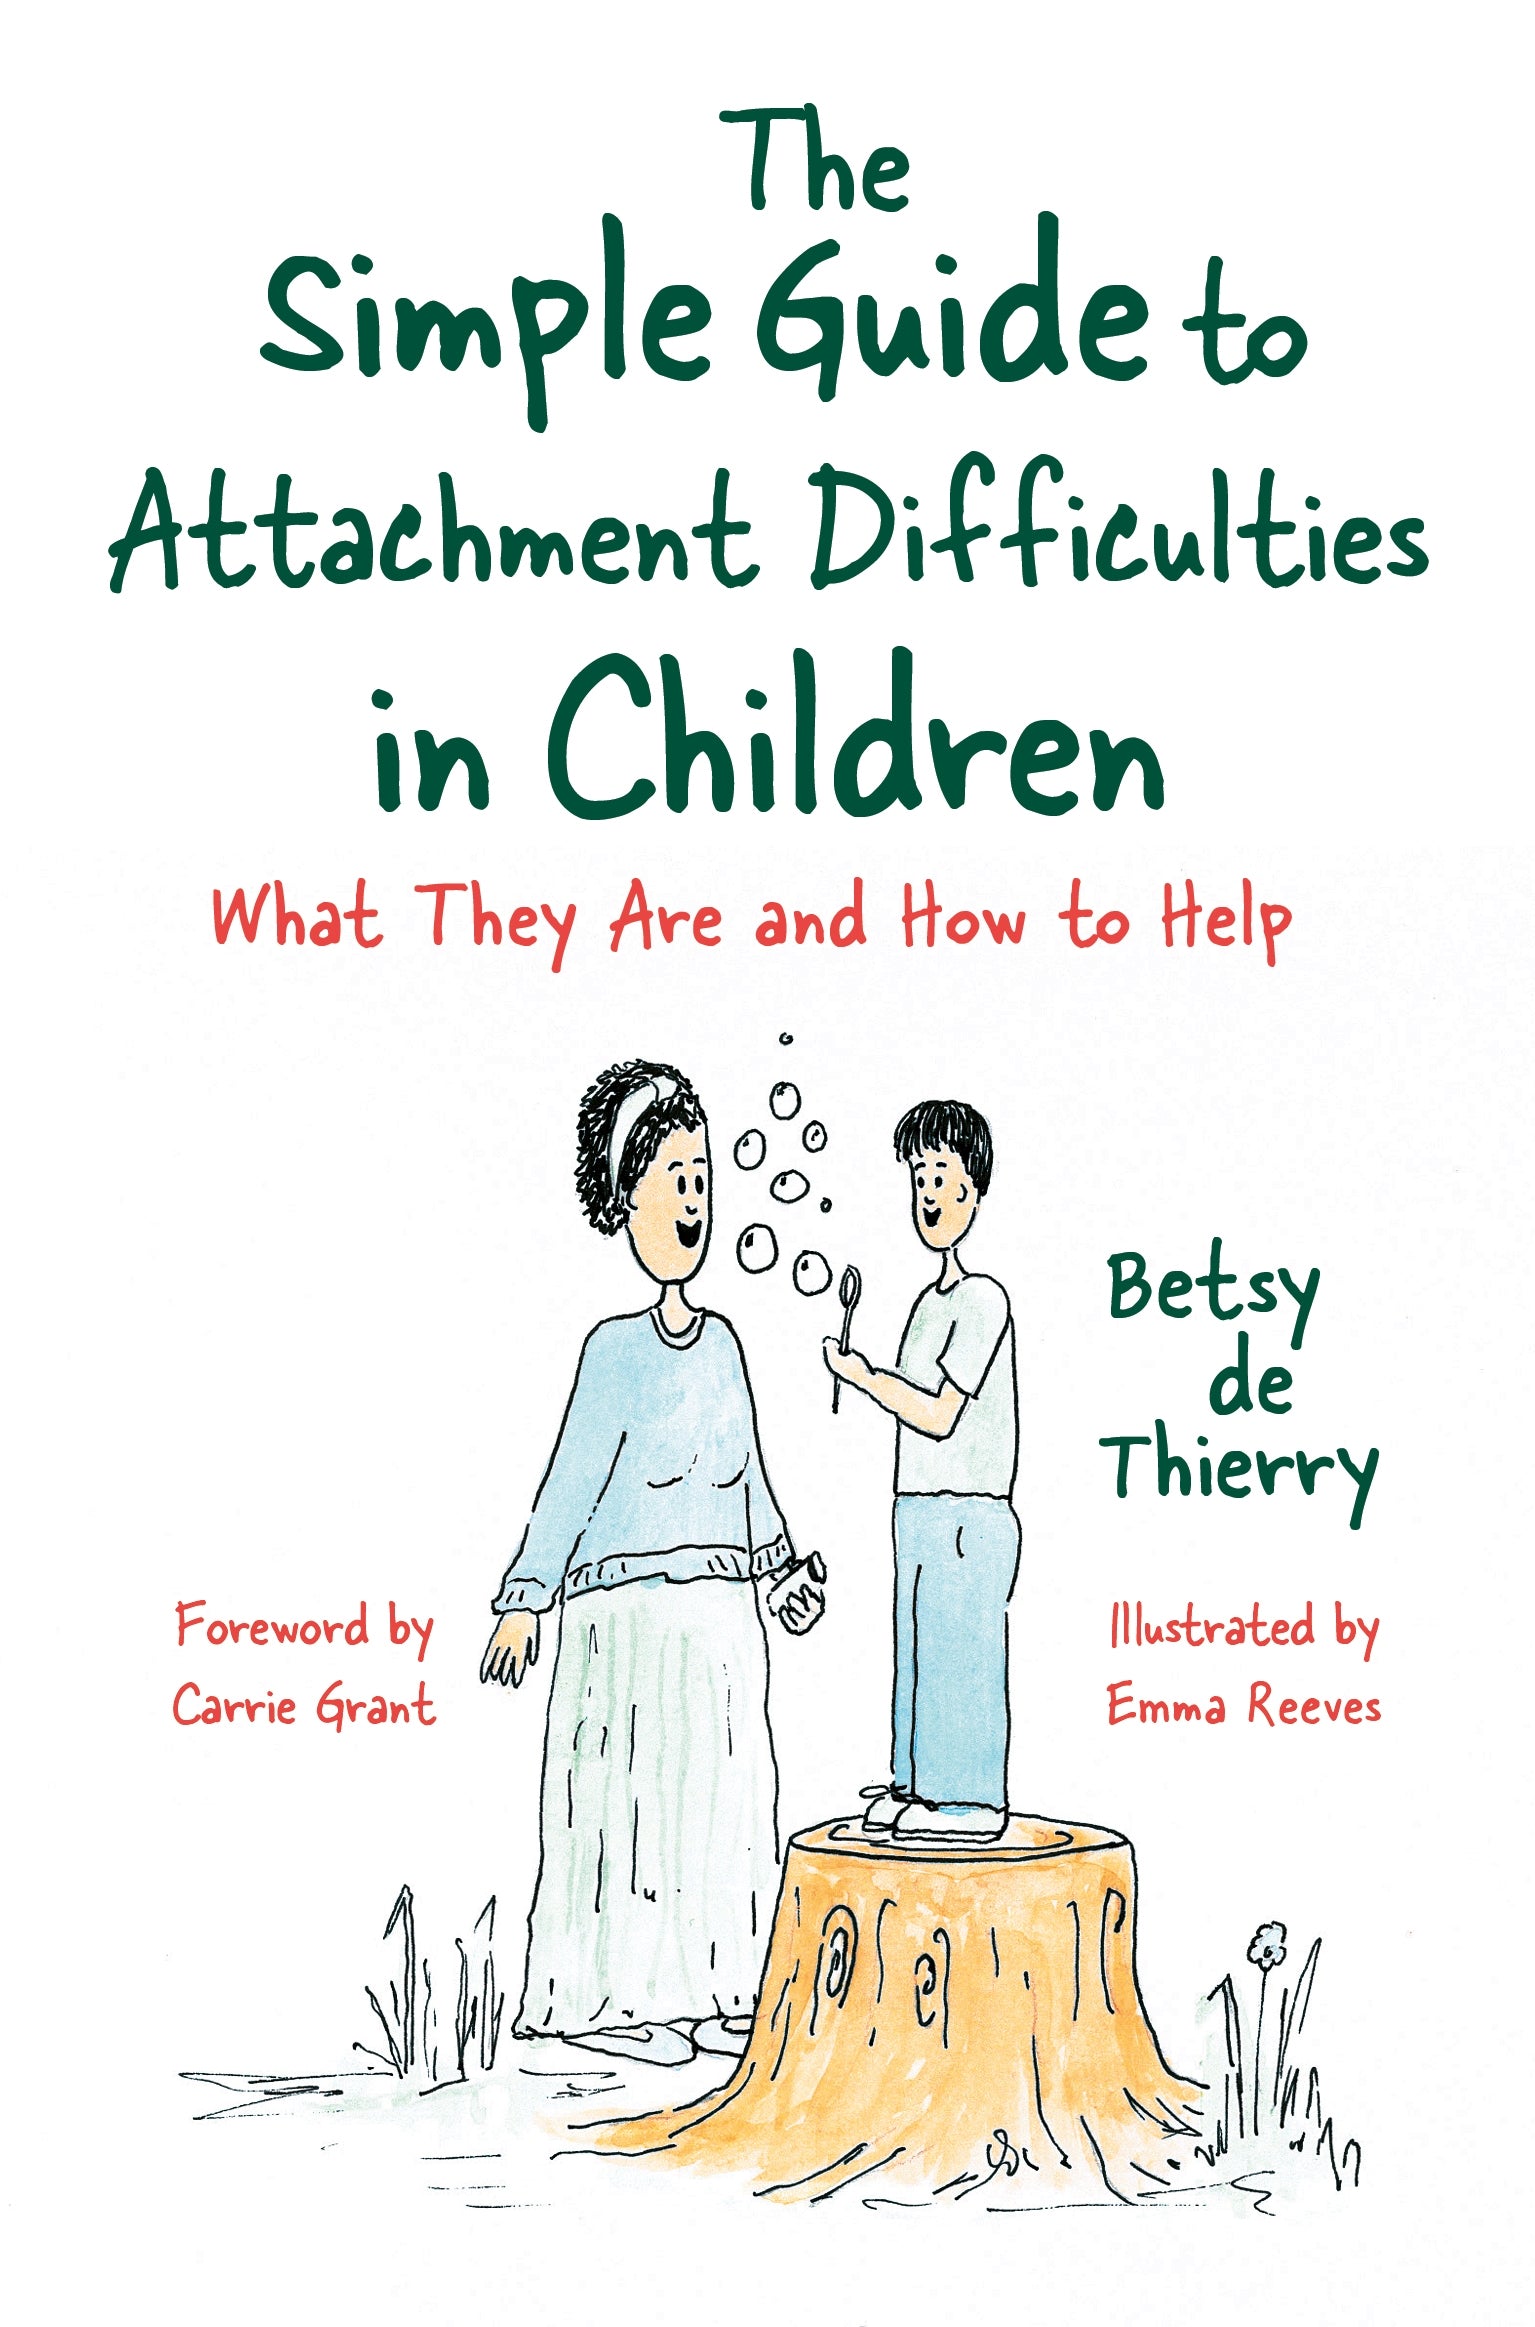 The Simple Guide to Attachment Difficulties in Children by Betsy de Thierry, Emma Reeves, Carrie Grant